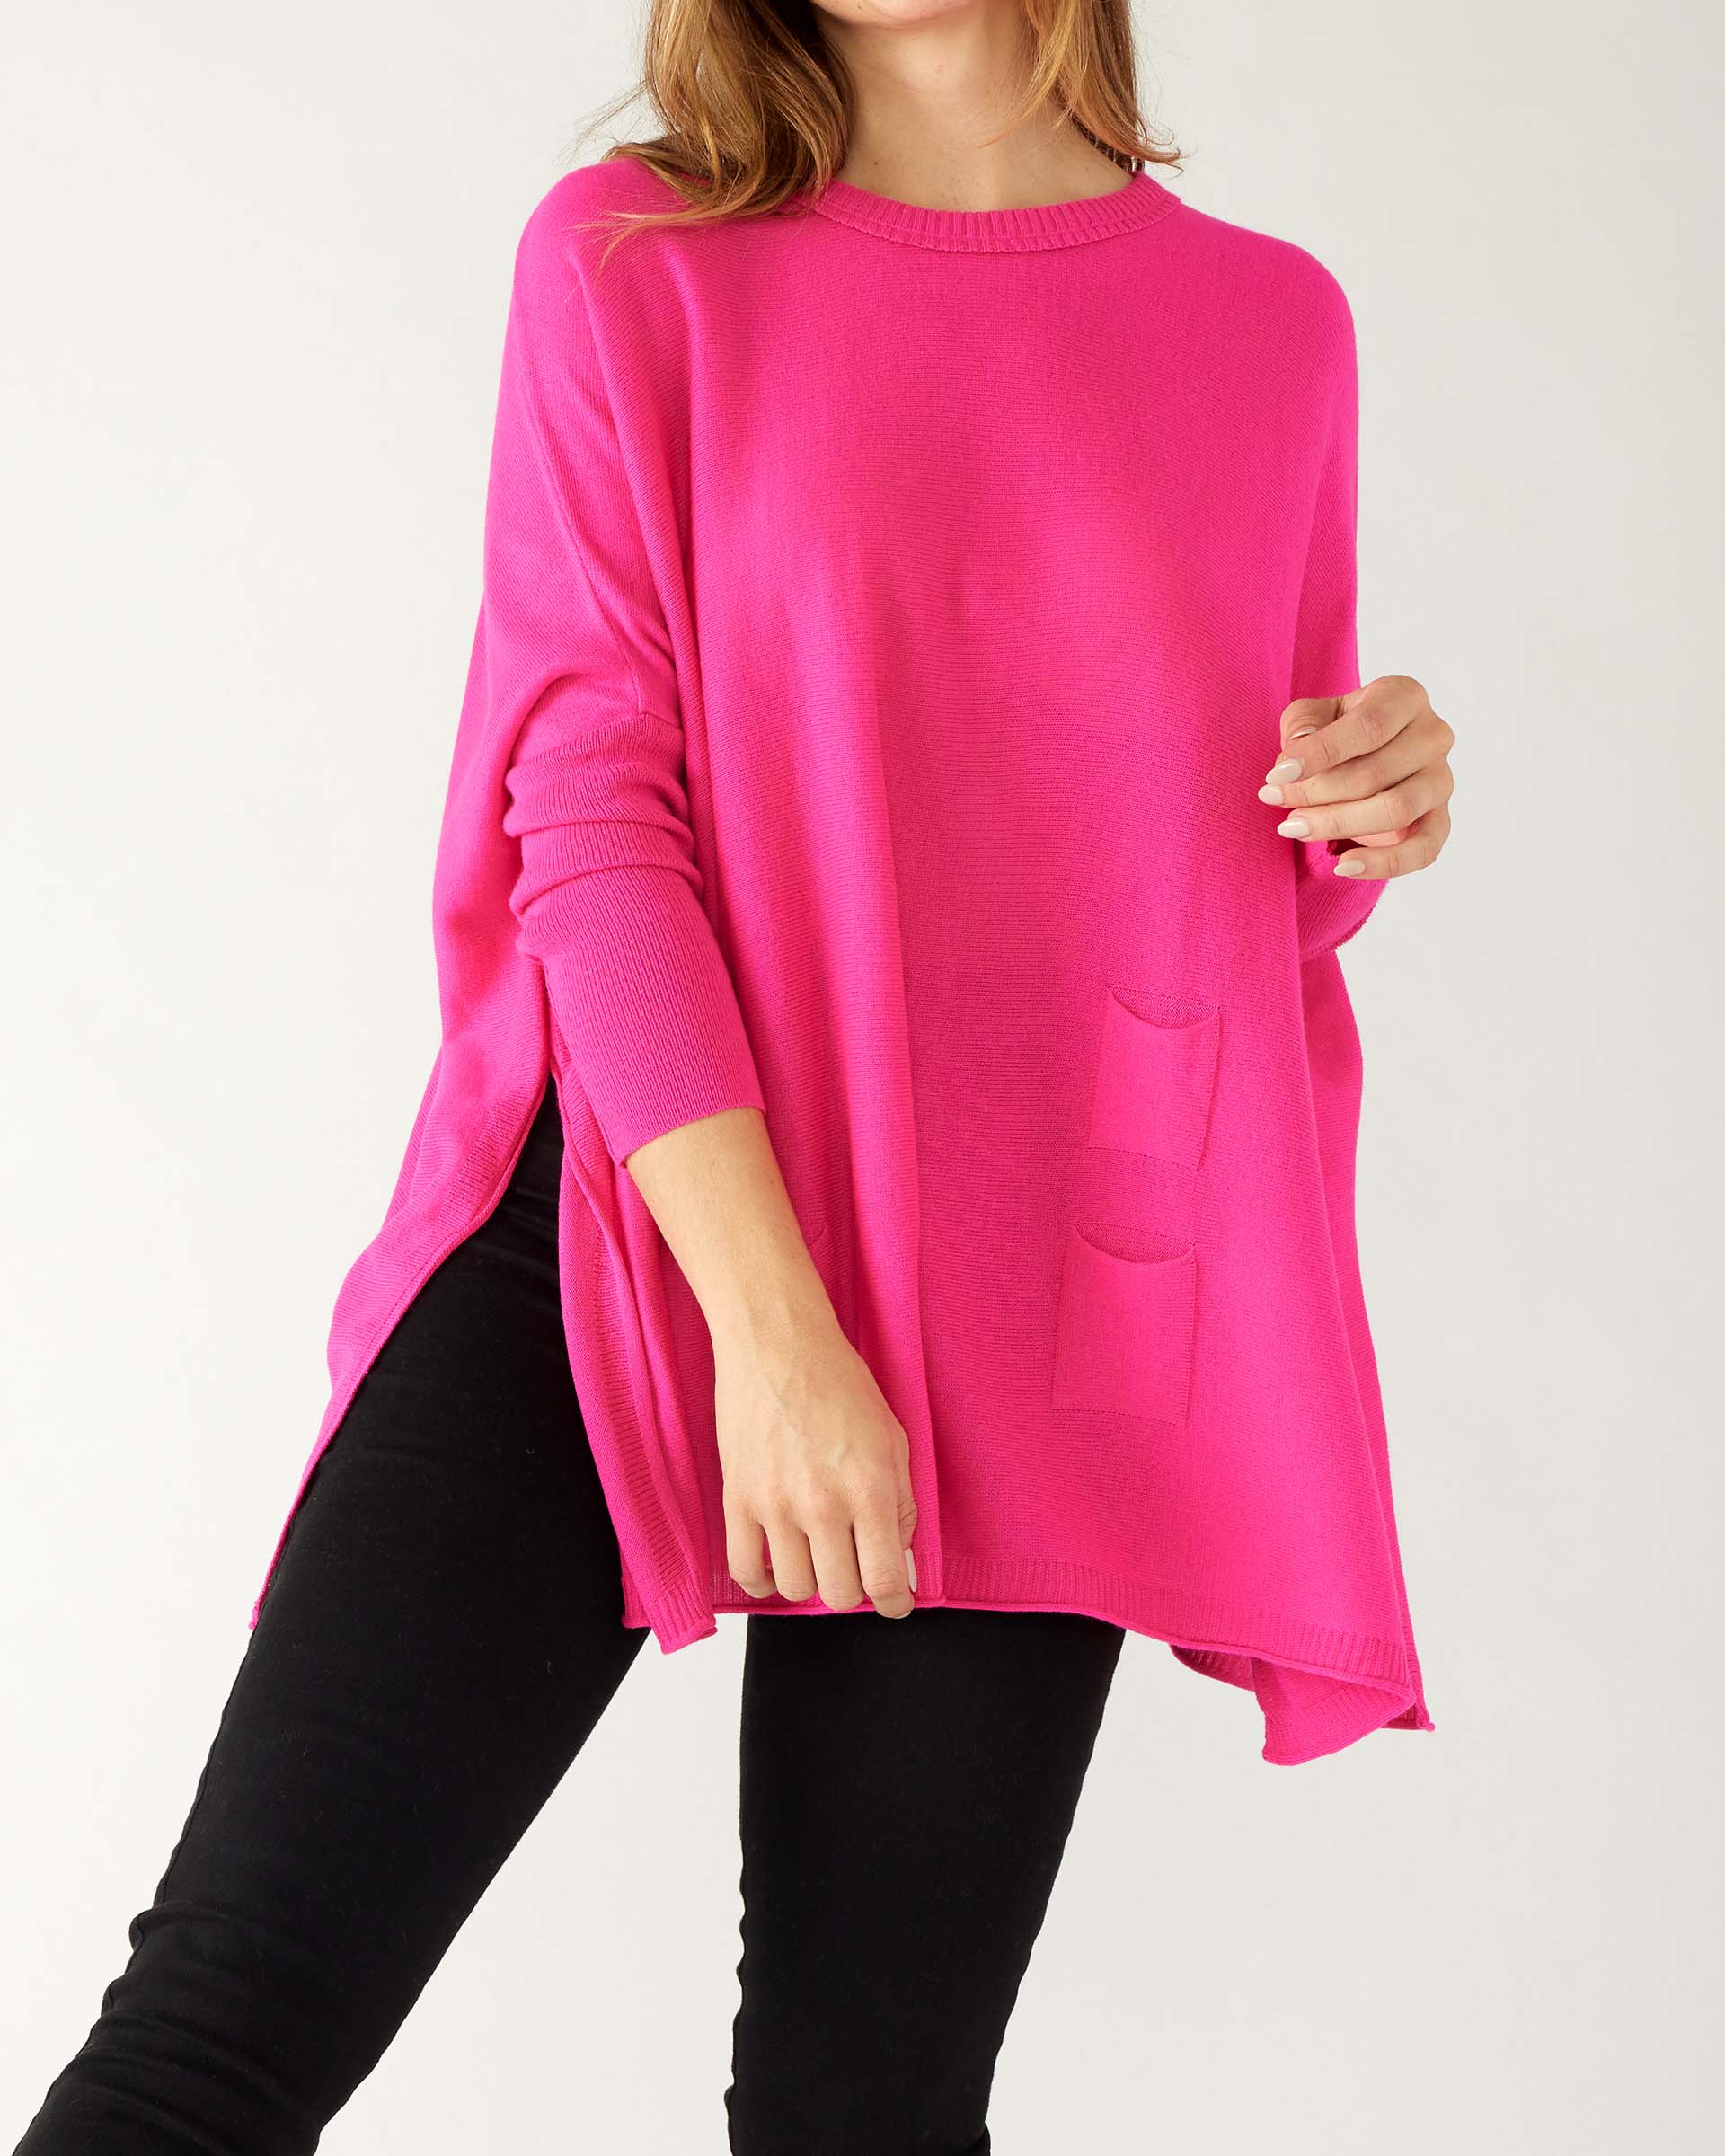 Women's Oversized Crewneck Knit Sweater in Hot Pink Chest View